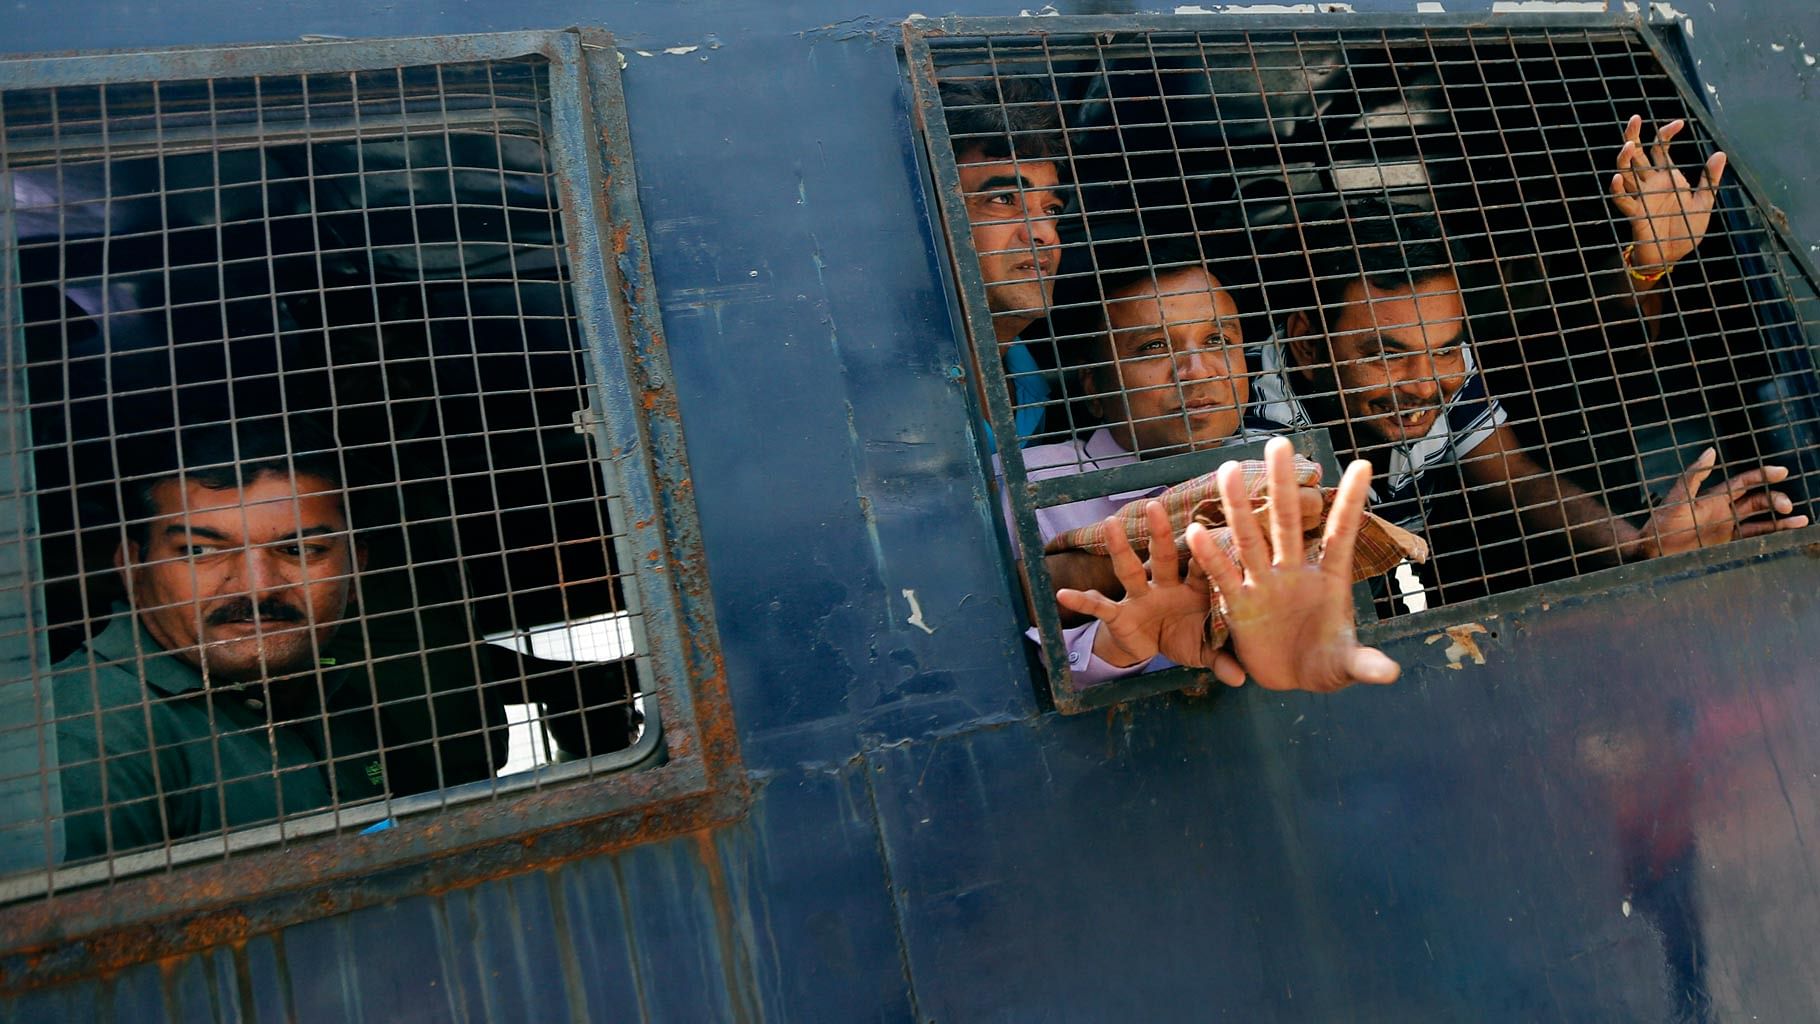 Convicts in the Gulbarg massacre case being taken away in a police van in Ahmadabad, on Thursday, 9 June 2016. (Photo: AP)